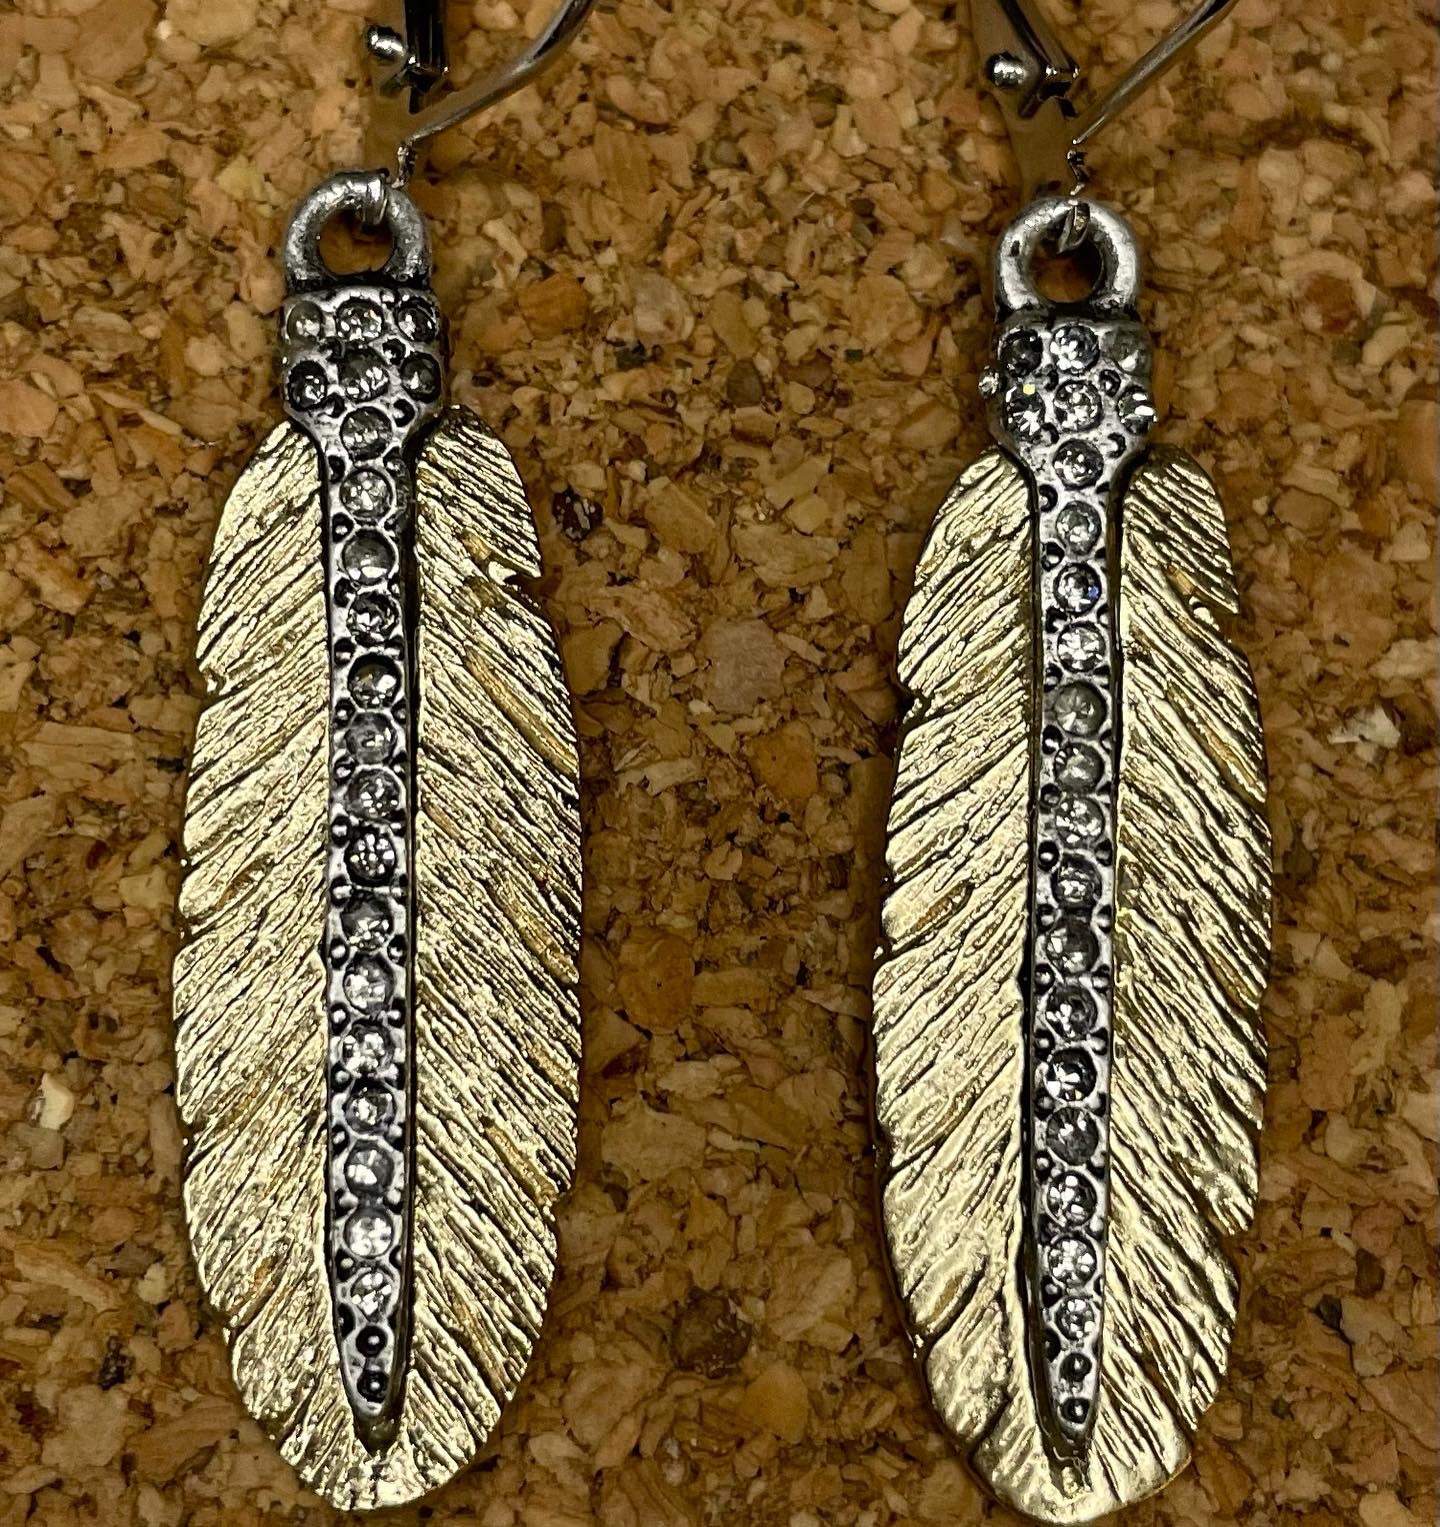 24k Gold Feather Earrings-TAT2 DESIGNS-crystal,Earrings,feather,gold,sliver,Swarovski